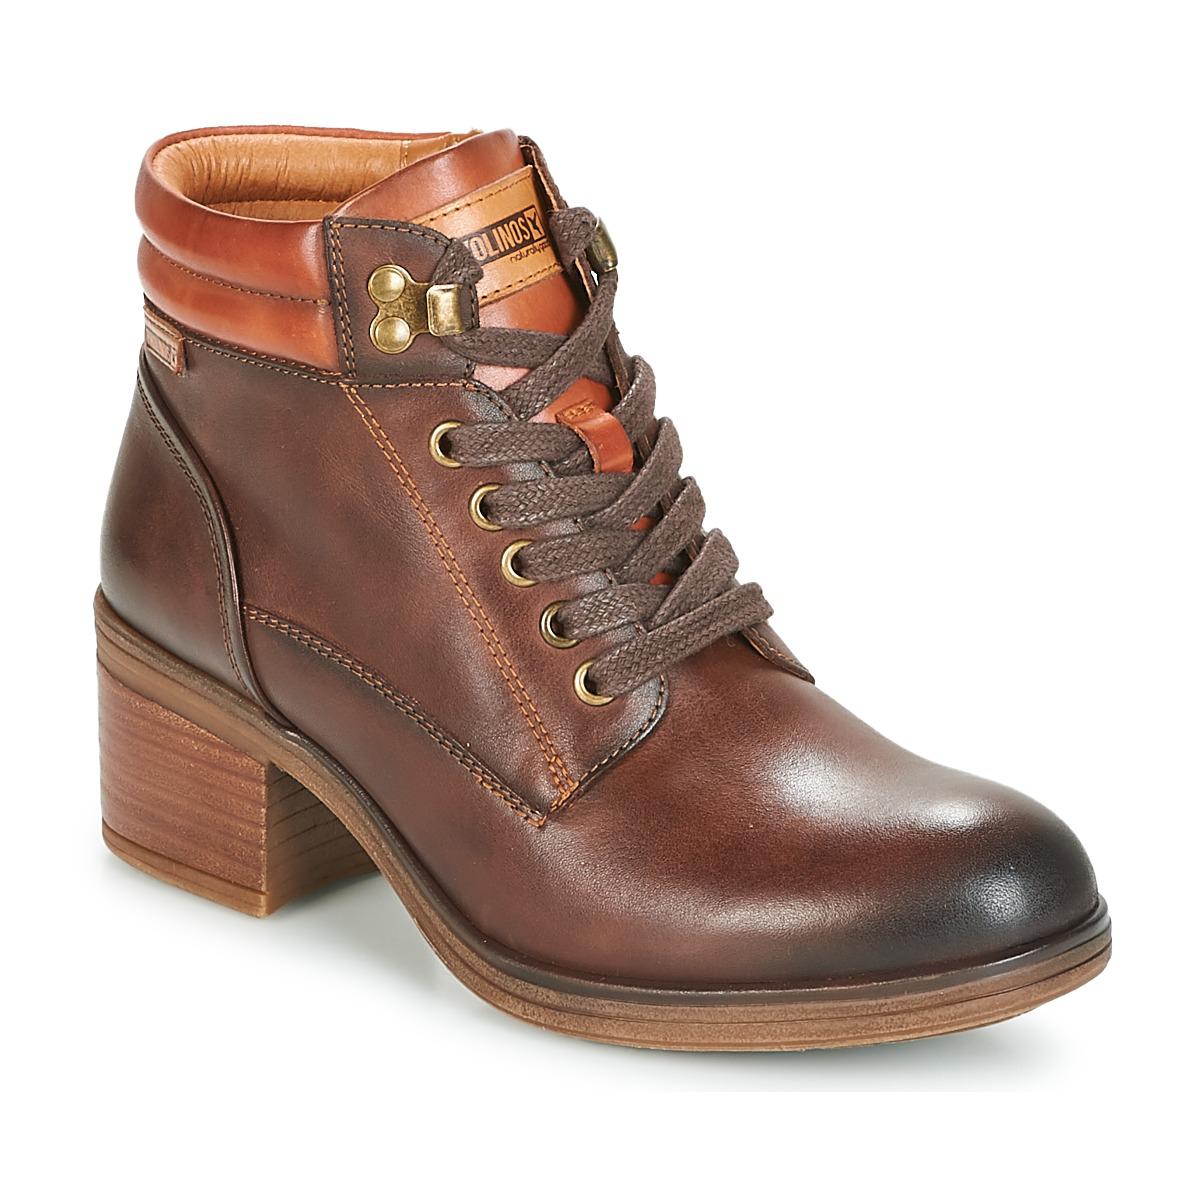 Pikolinos Leather Lyon W6n Women's Low Ankle Boots In Brown - Lyst